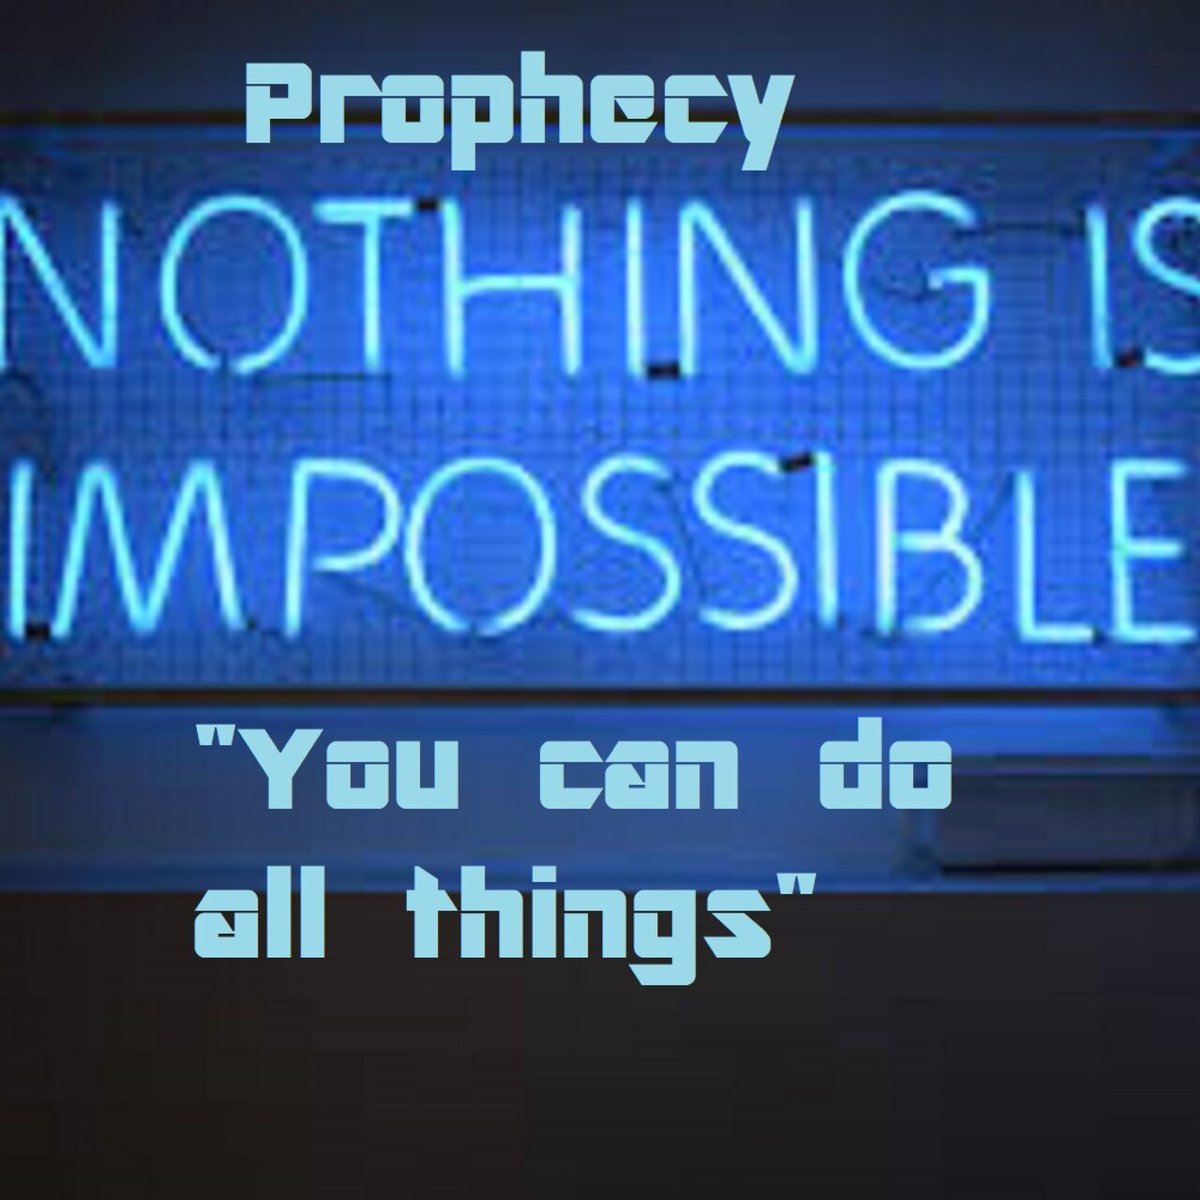 Listen to You can do all things by Prophecy tidal.com/track/26673284…
#producer #producerlife #producergrind #producerlifestyle #hiphop #rap #soul #music #instrumental #instrumentalhiphop #instrumentalmusic #indiemusic #indieartist #tidal #Spotify #iTunes #applemusic